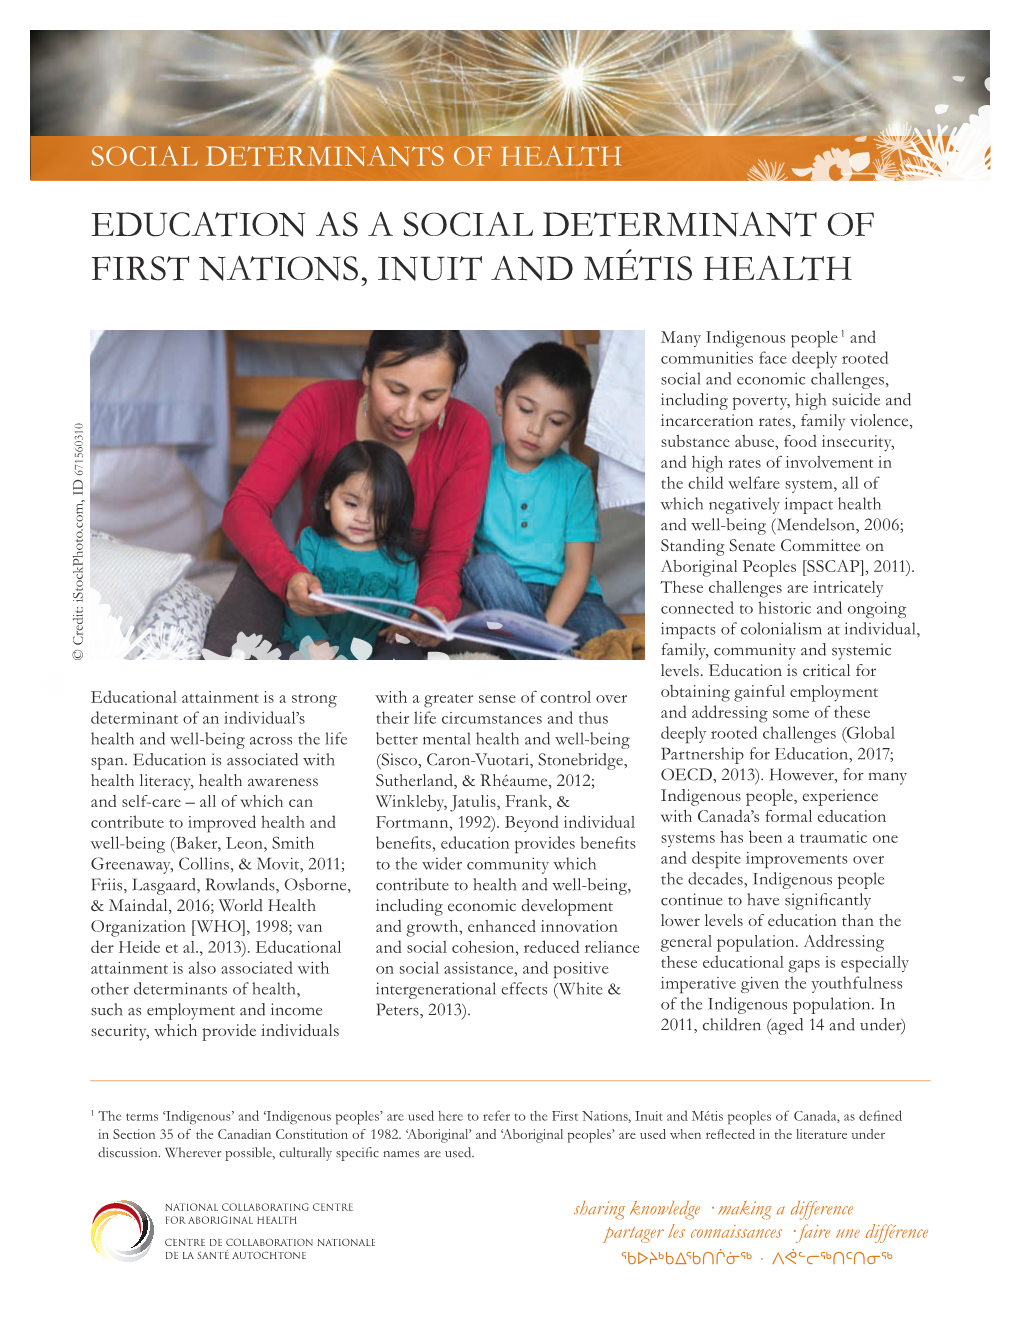 Education As a Social Determinant of First Nations, Inuit and Métis Health